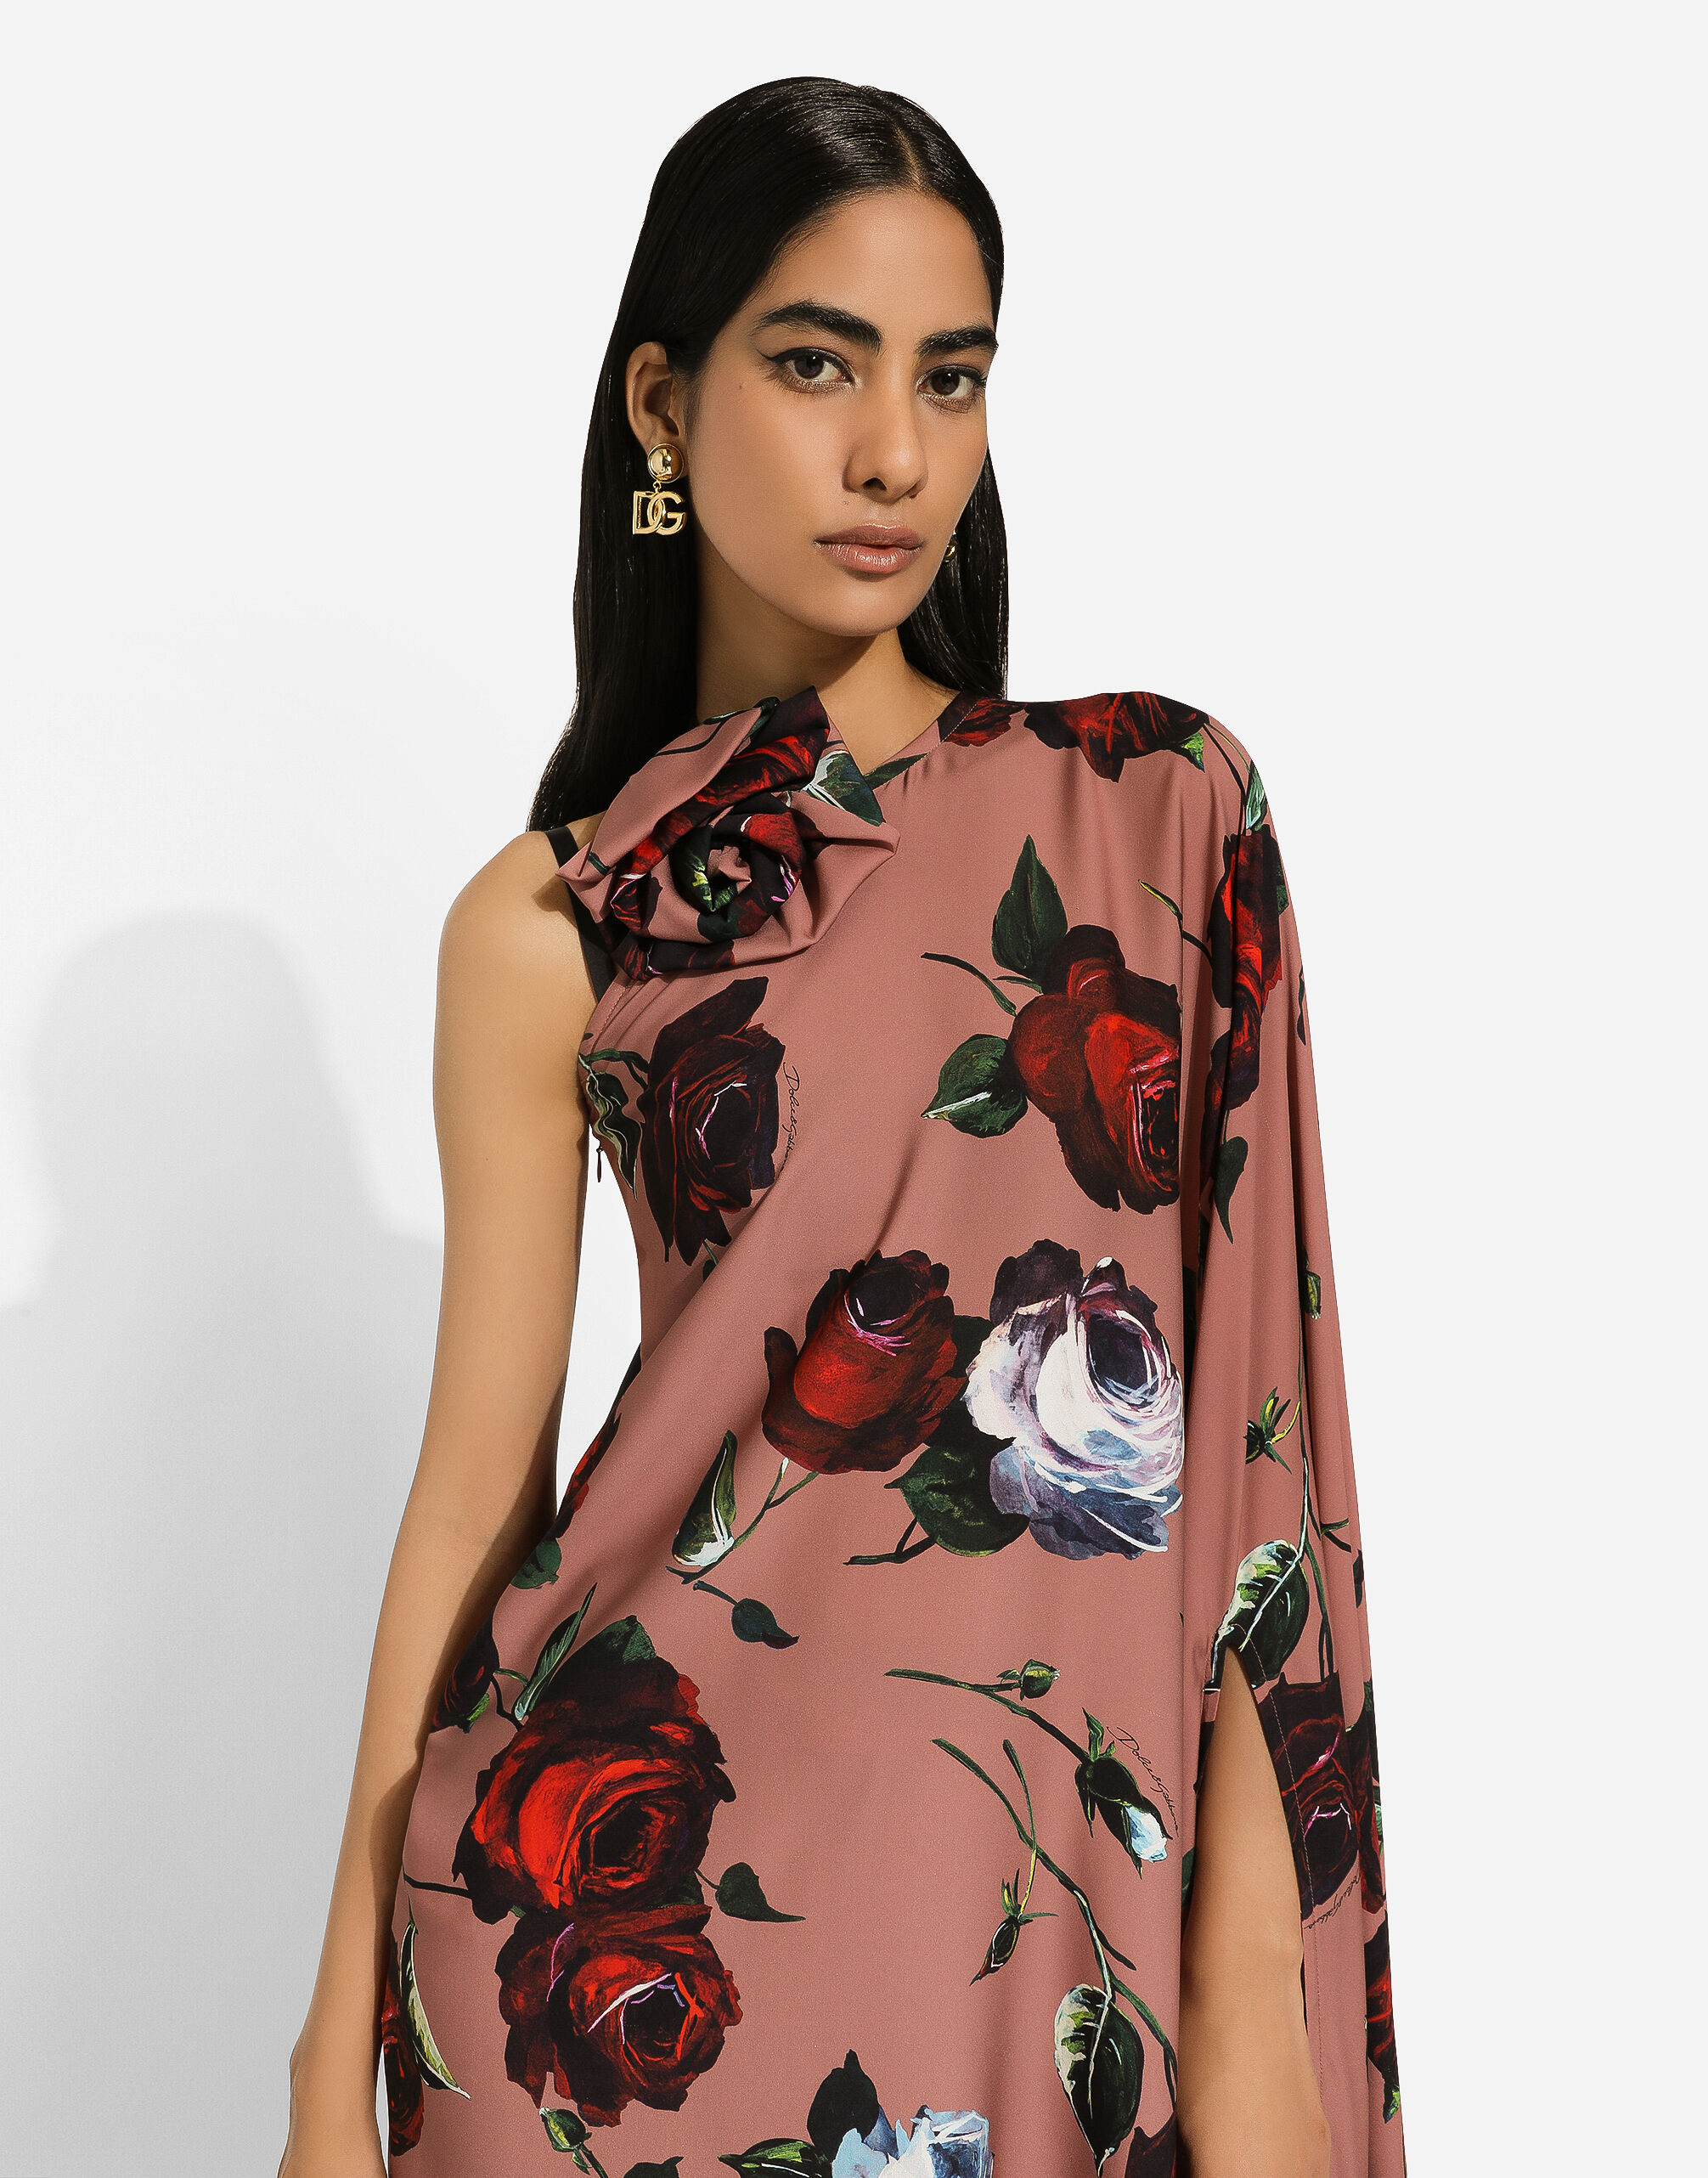 Her lip to asymmetrical floral dress - ワンピース